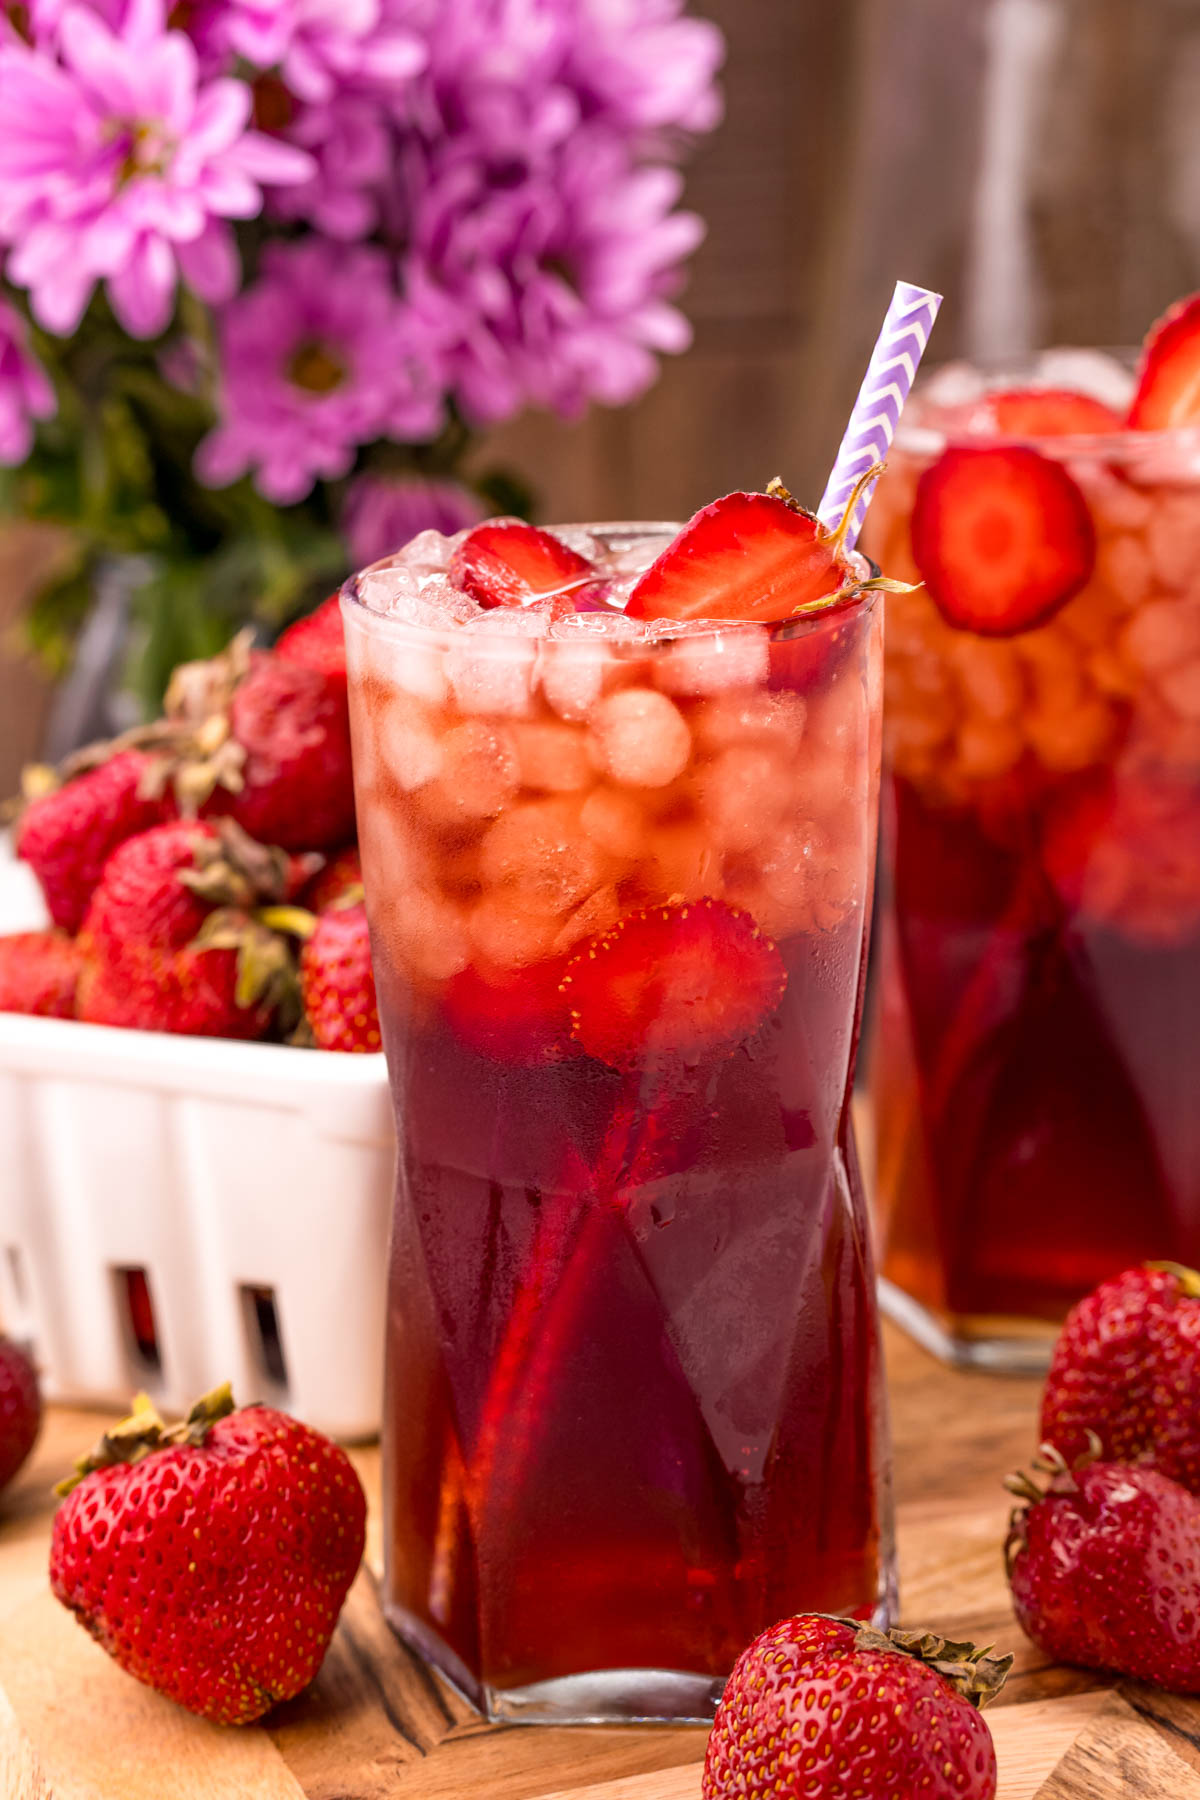 Close up photo of a glass of strawberry tea with another glass and a carton of strawberries in the background.